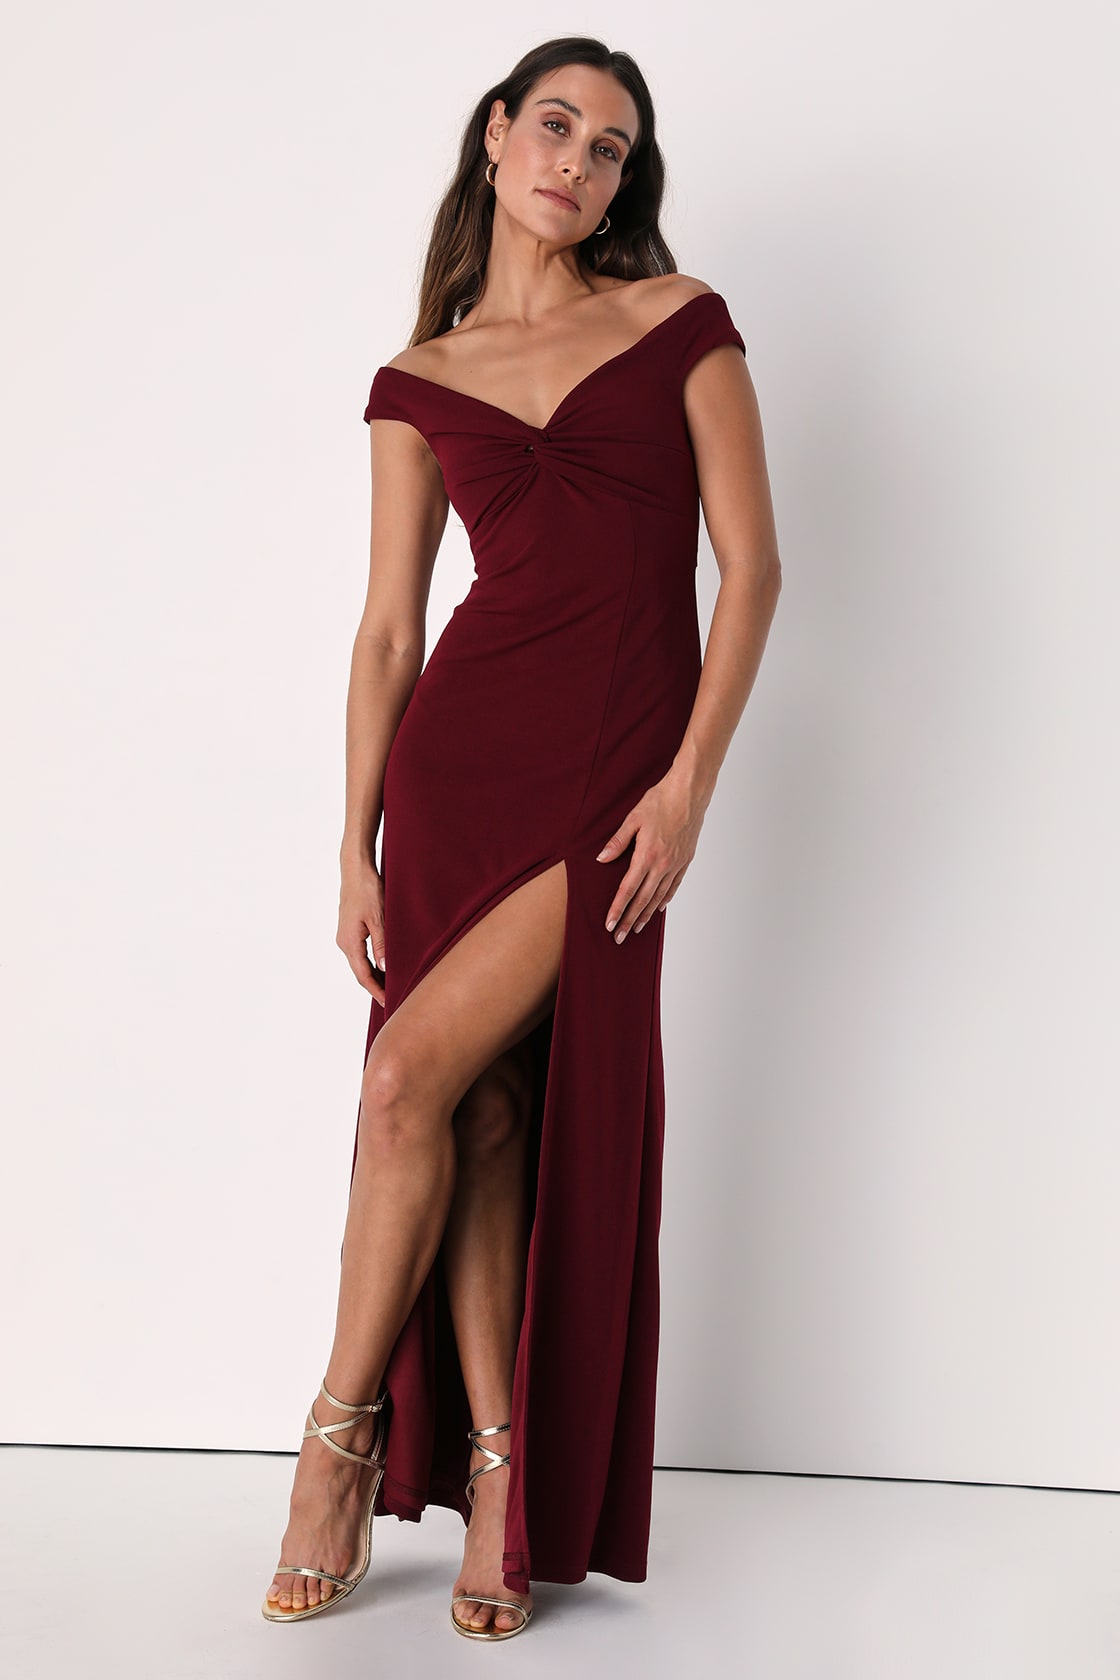 Behold My Love Burgundy Off-The-Shoulder Twist-Front Maxi Dress